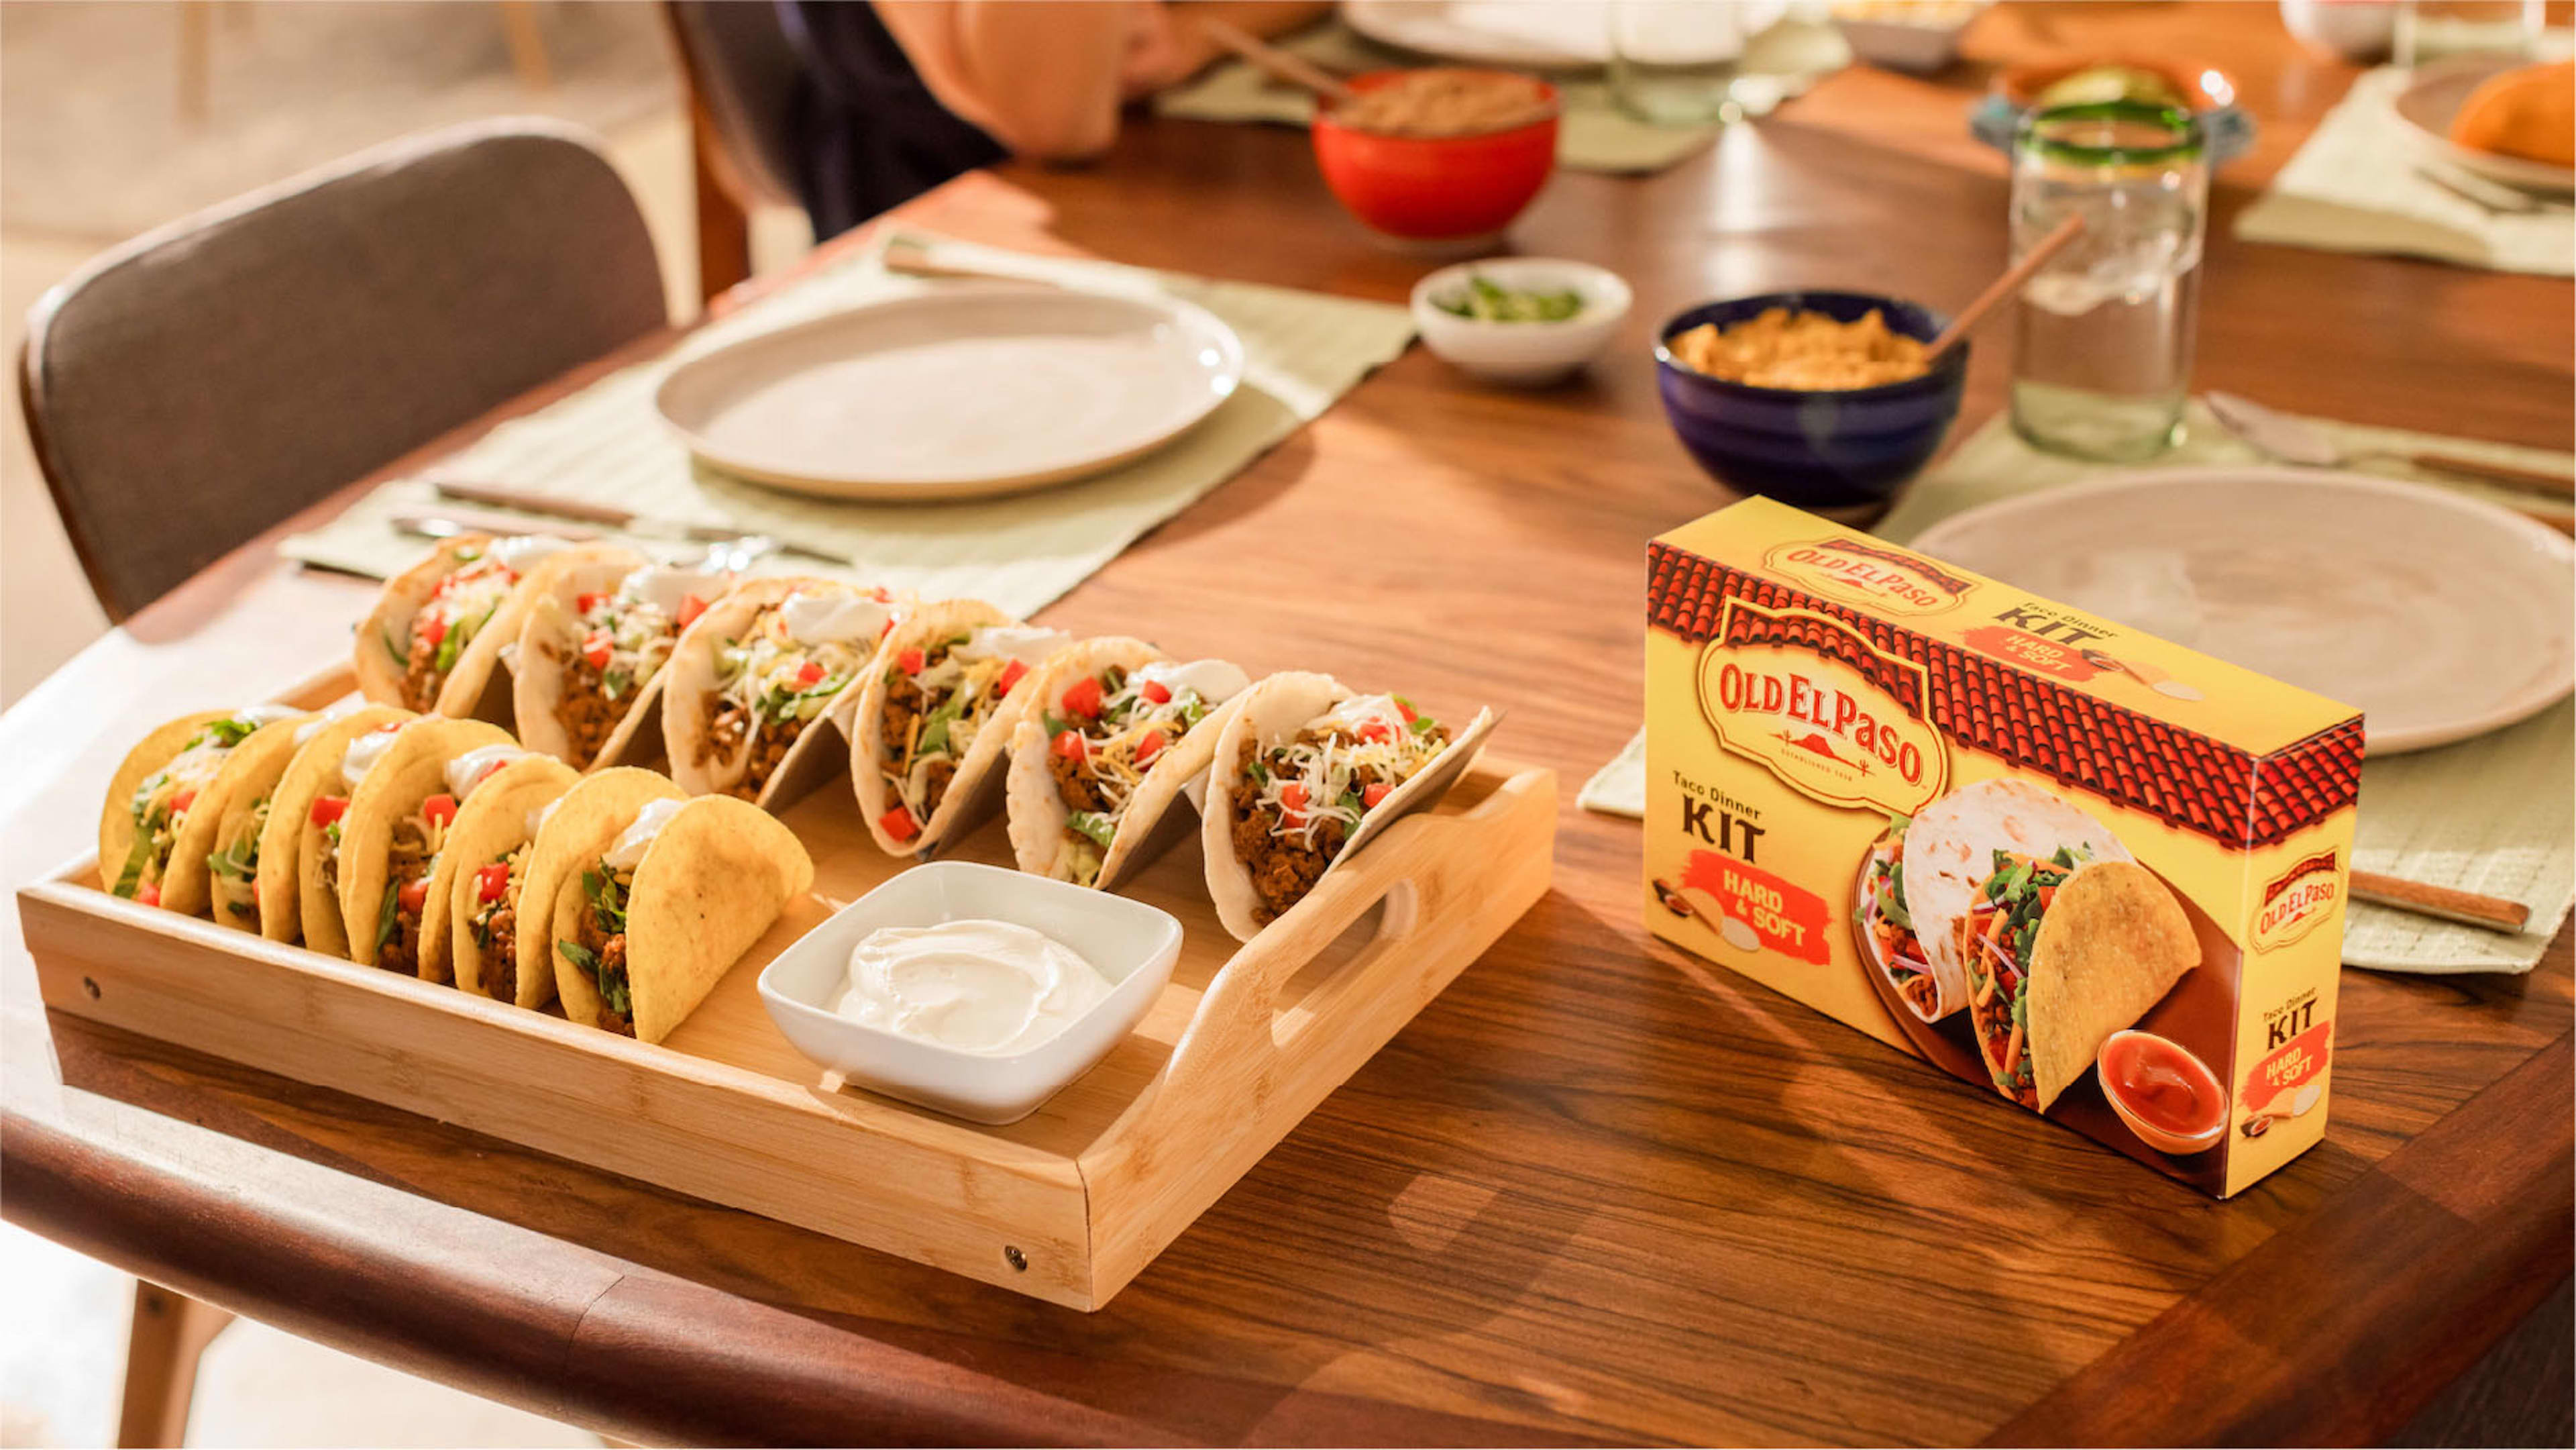 Table with a tray of tacos and a box of Old El Paso taco shells